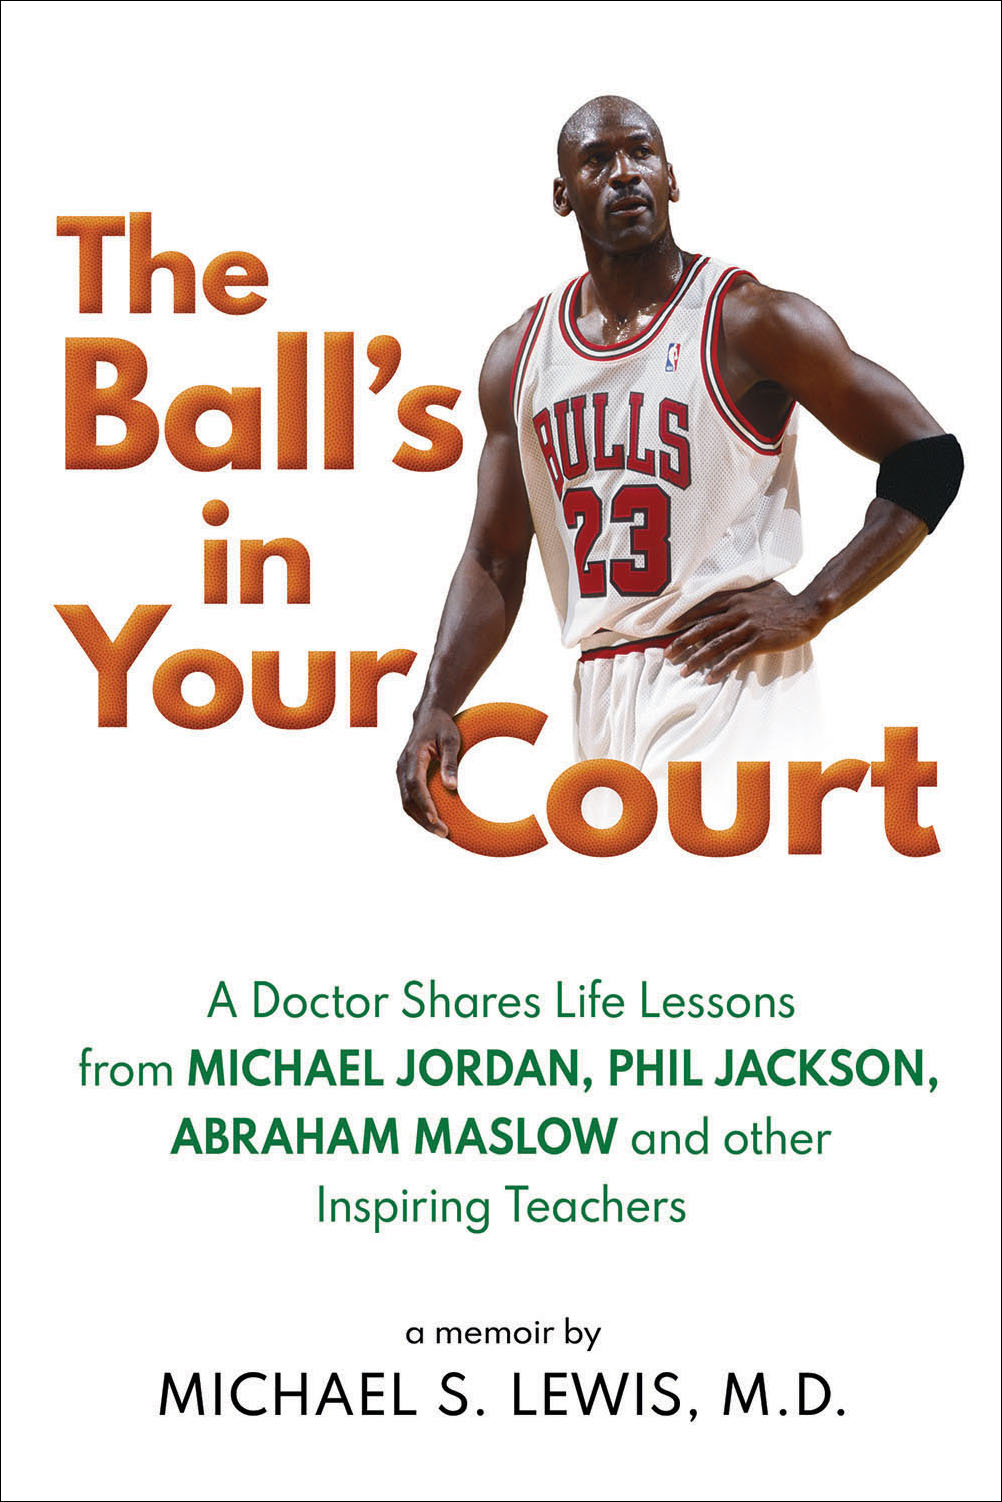 The Ball's In Your Court by @MLewisMDAuthor